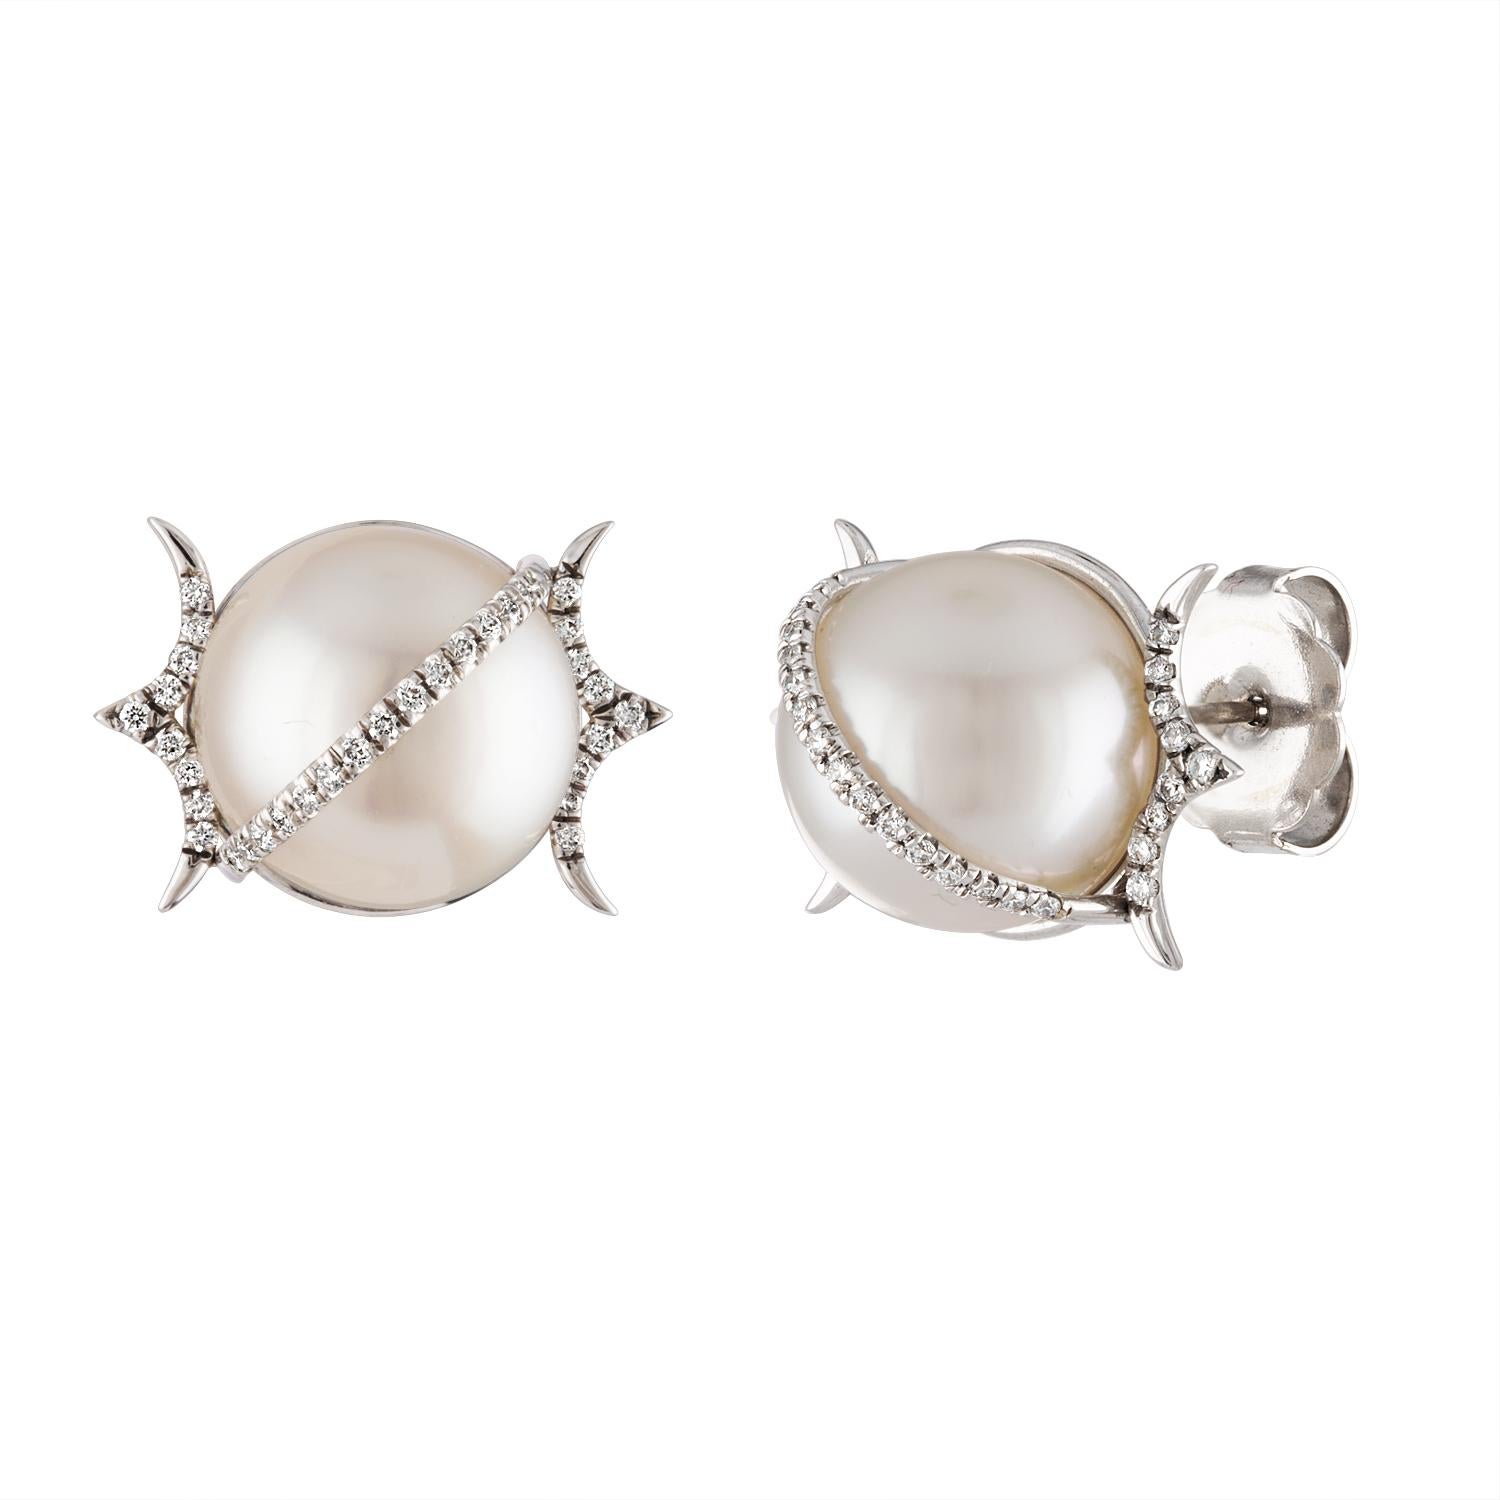 These South Sea Pearl and diamond stud earrings are set in 18K white gold. The pearls measure 12.6mm and the earrings contain 0.34 carats of diamonds. The earrings have secure push back closures. This pair of Australian South Sea pearls feature high